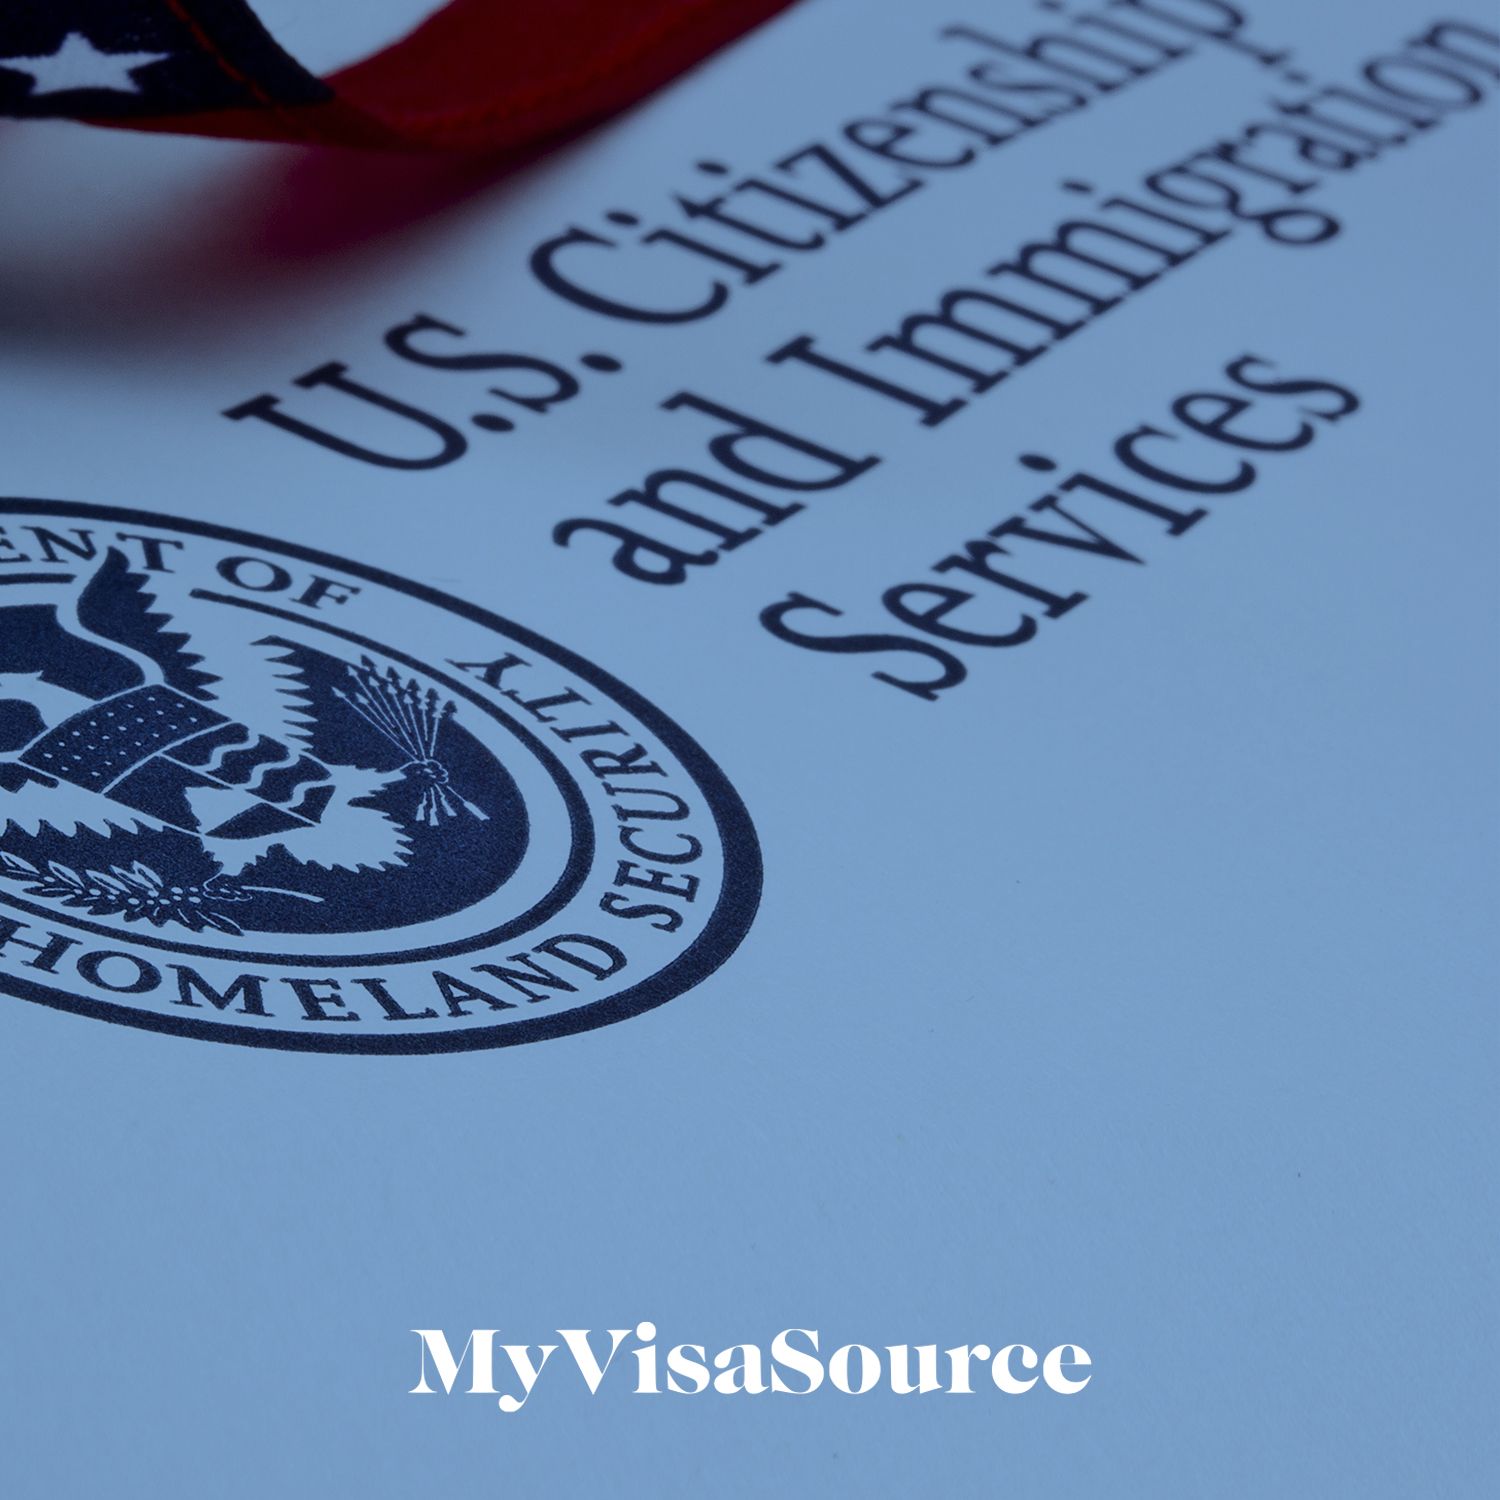 us citizenship and immigration services letterhead my visa source